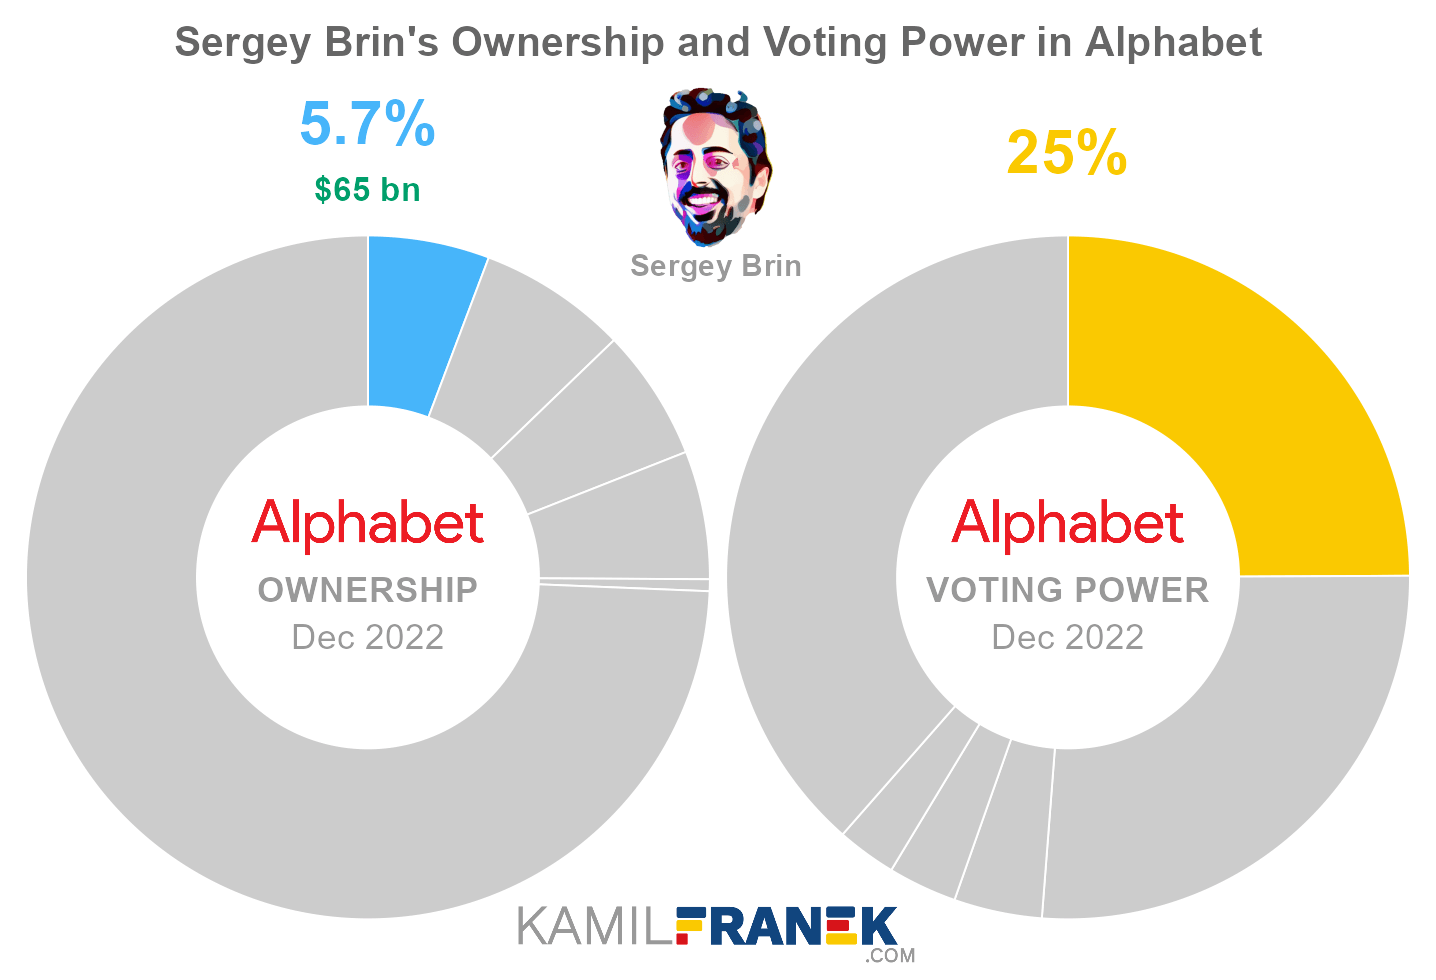 Sergey Brin's share ownership and voting power in Alphabet (chart)